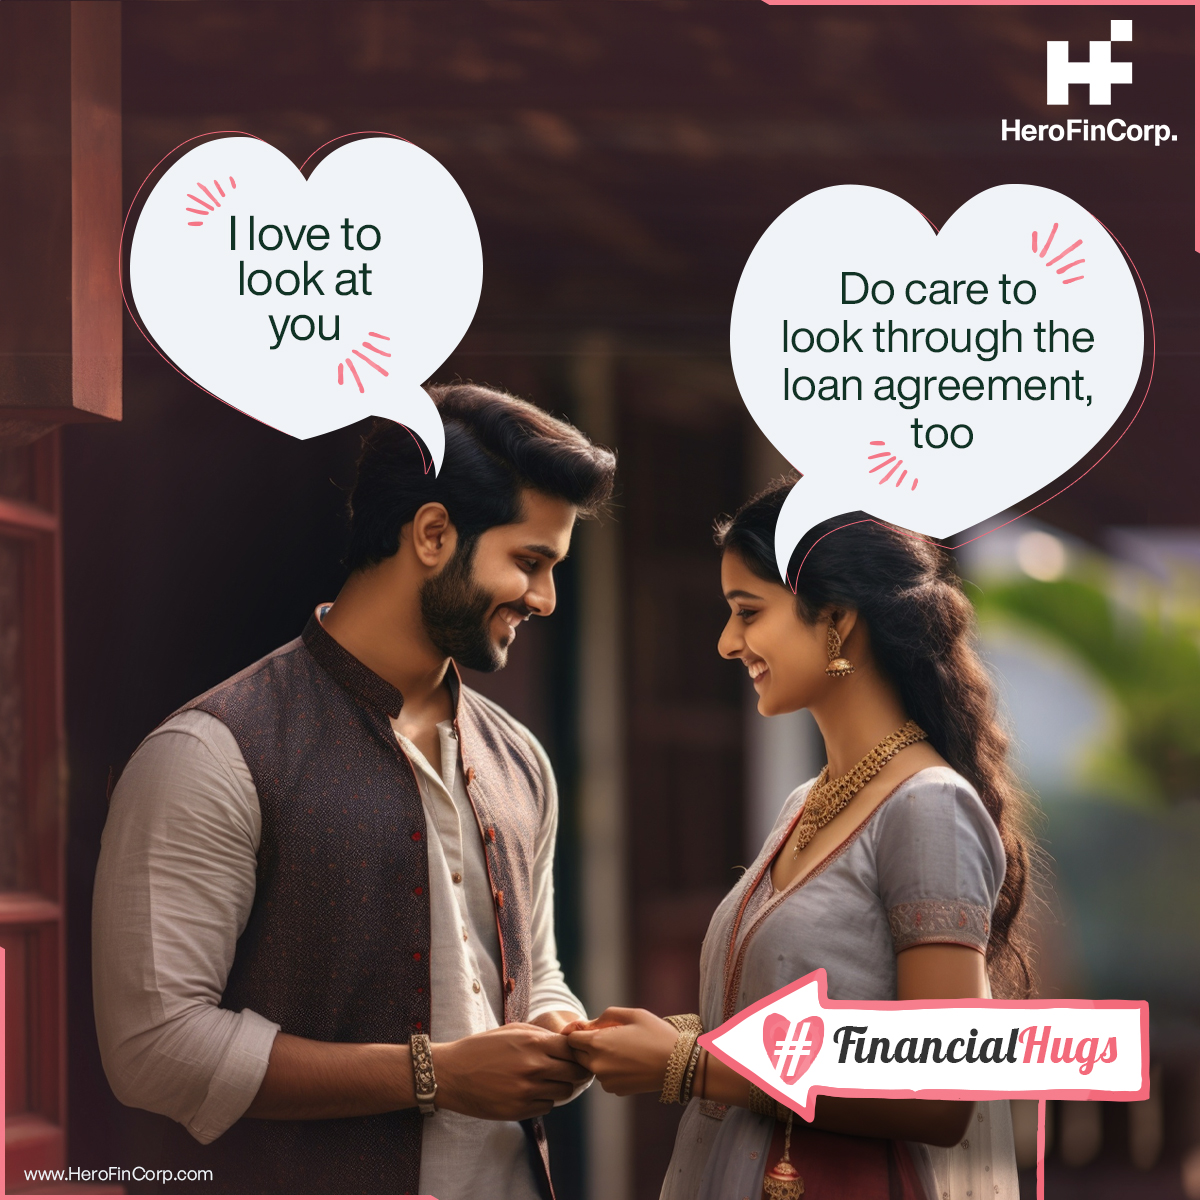 This Valentine's season, present your partner with the invaluable gift of awareness when it comes to your loan agreement.🤗📃

#HeroFinCorp #FinancialHugs #ValentinesSeason #LoanAgreement #FinancialSecurity